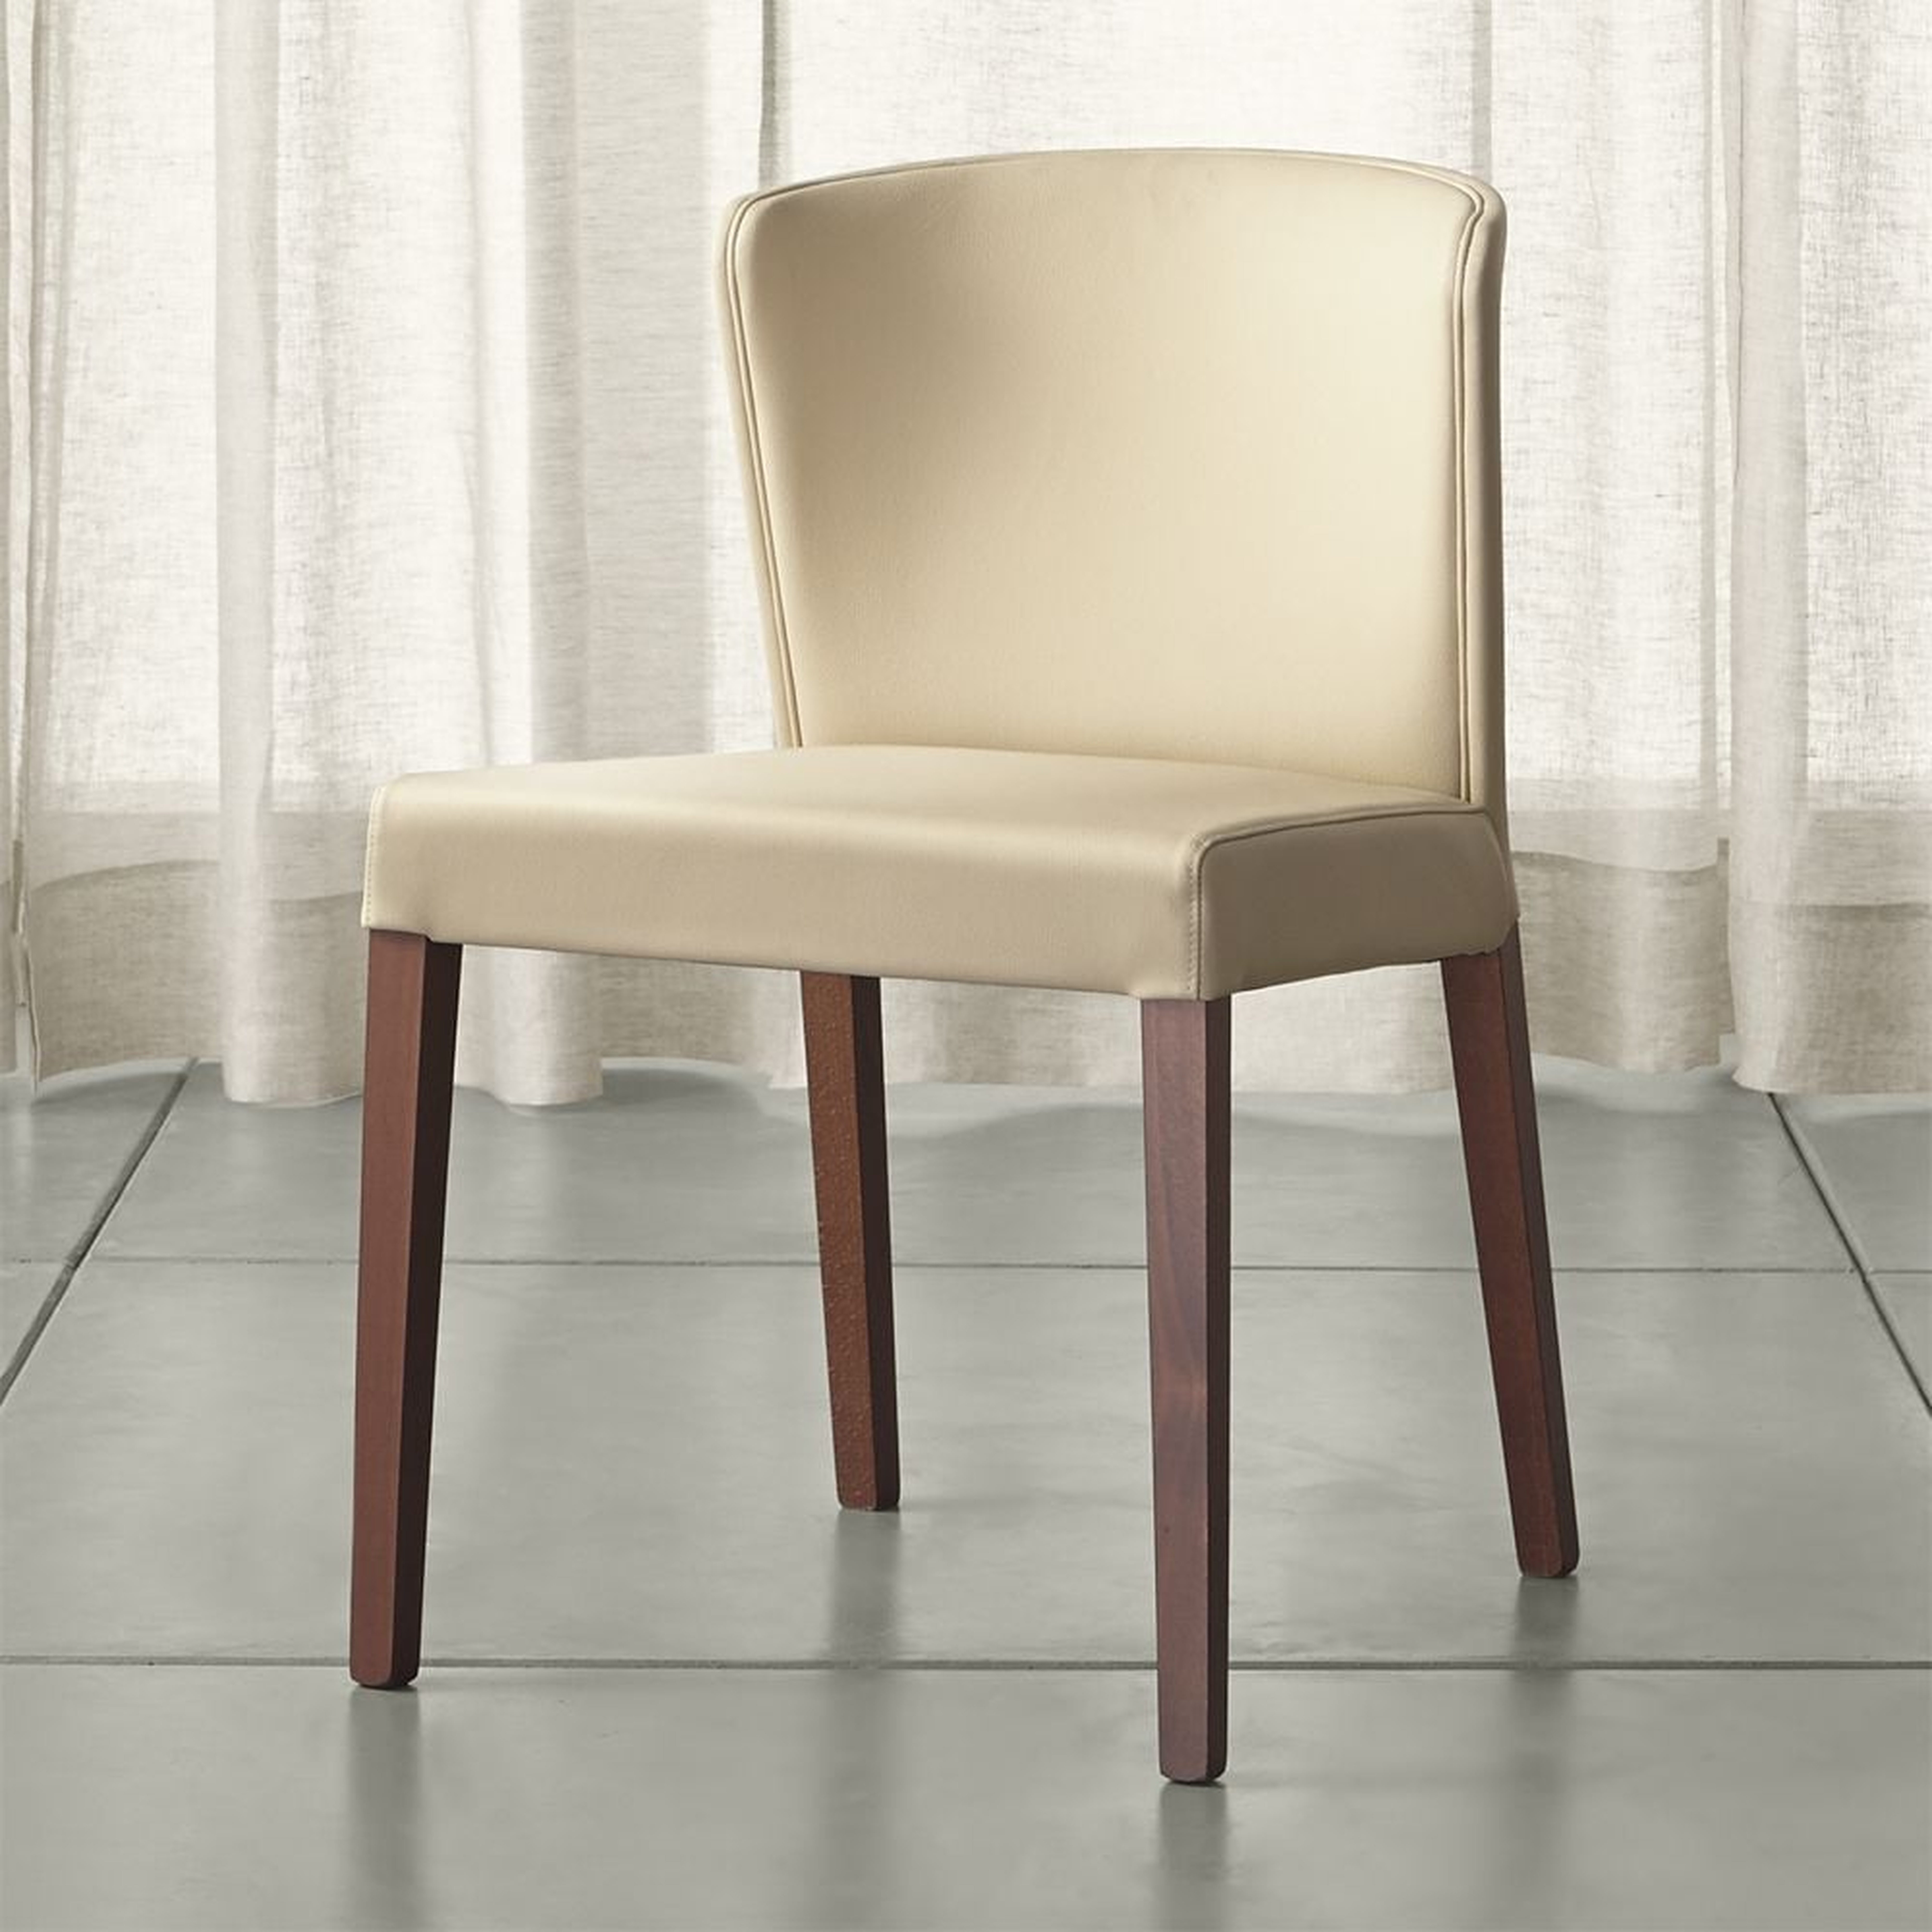 Curran Crema Dining Chair - Crate and Barrel